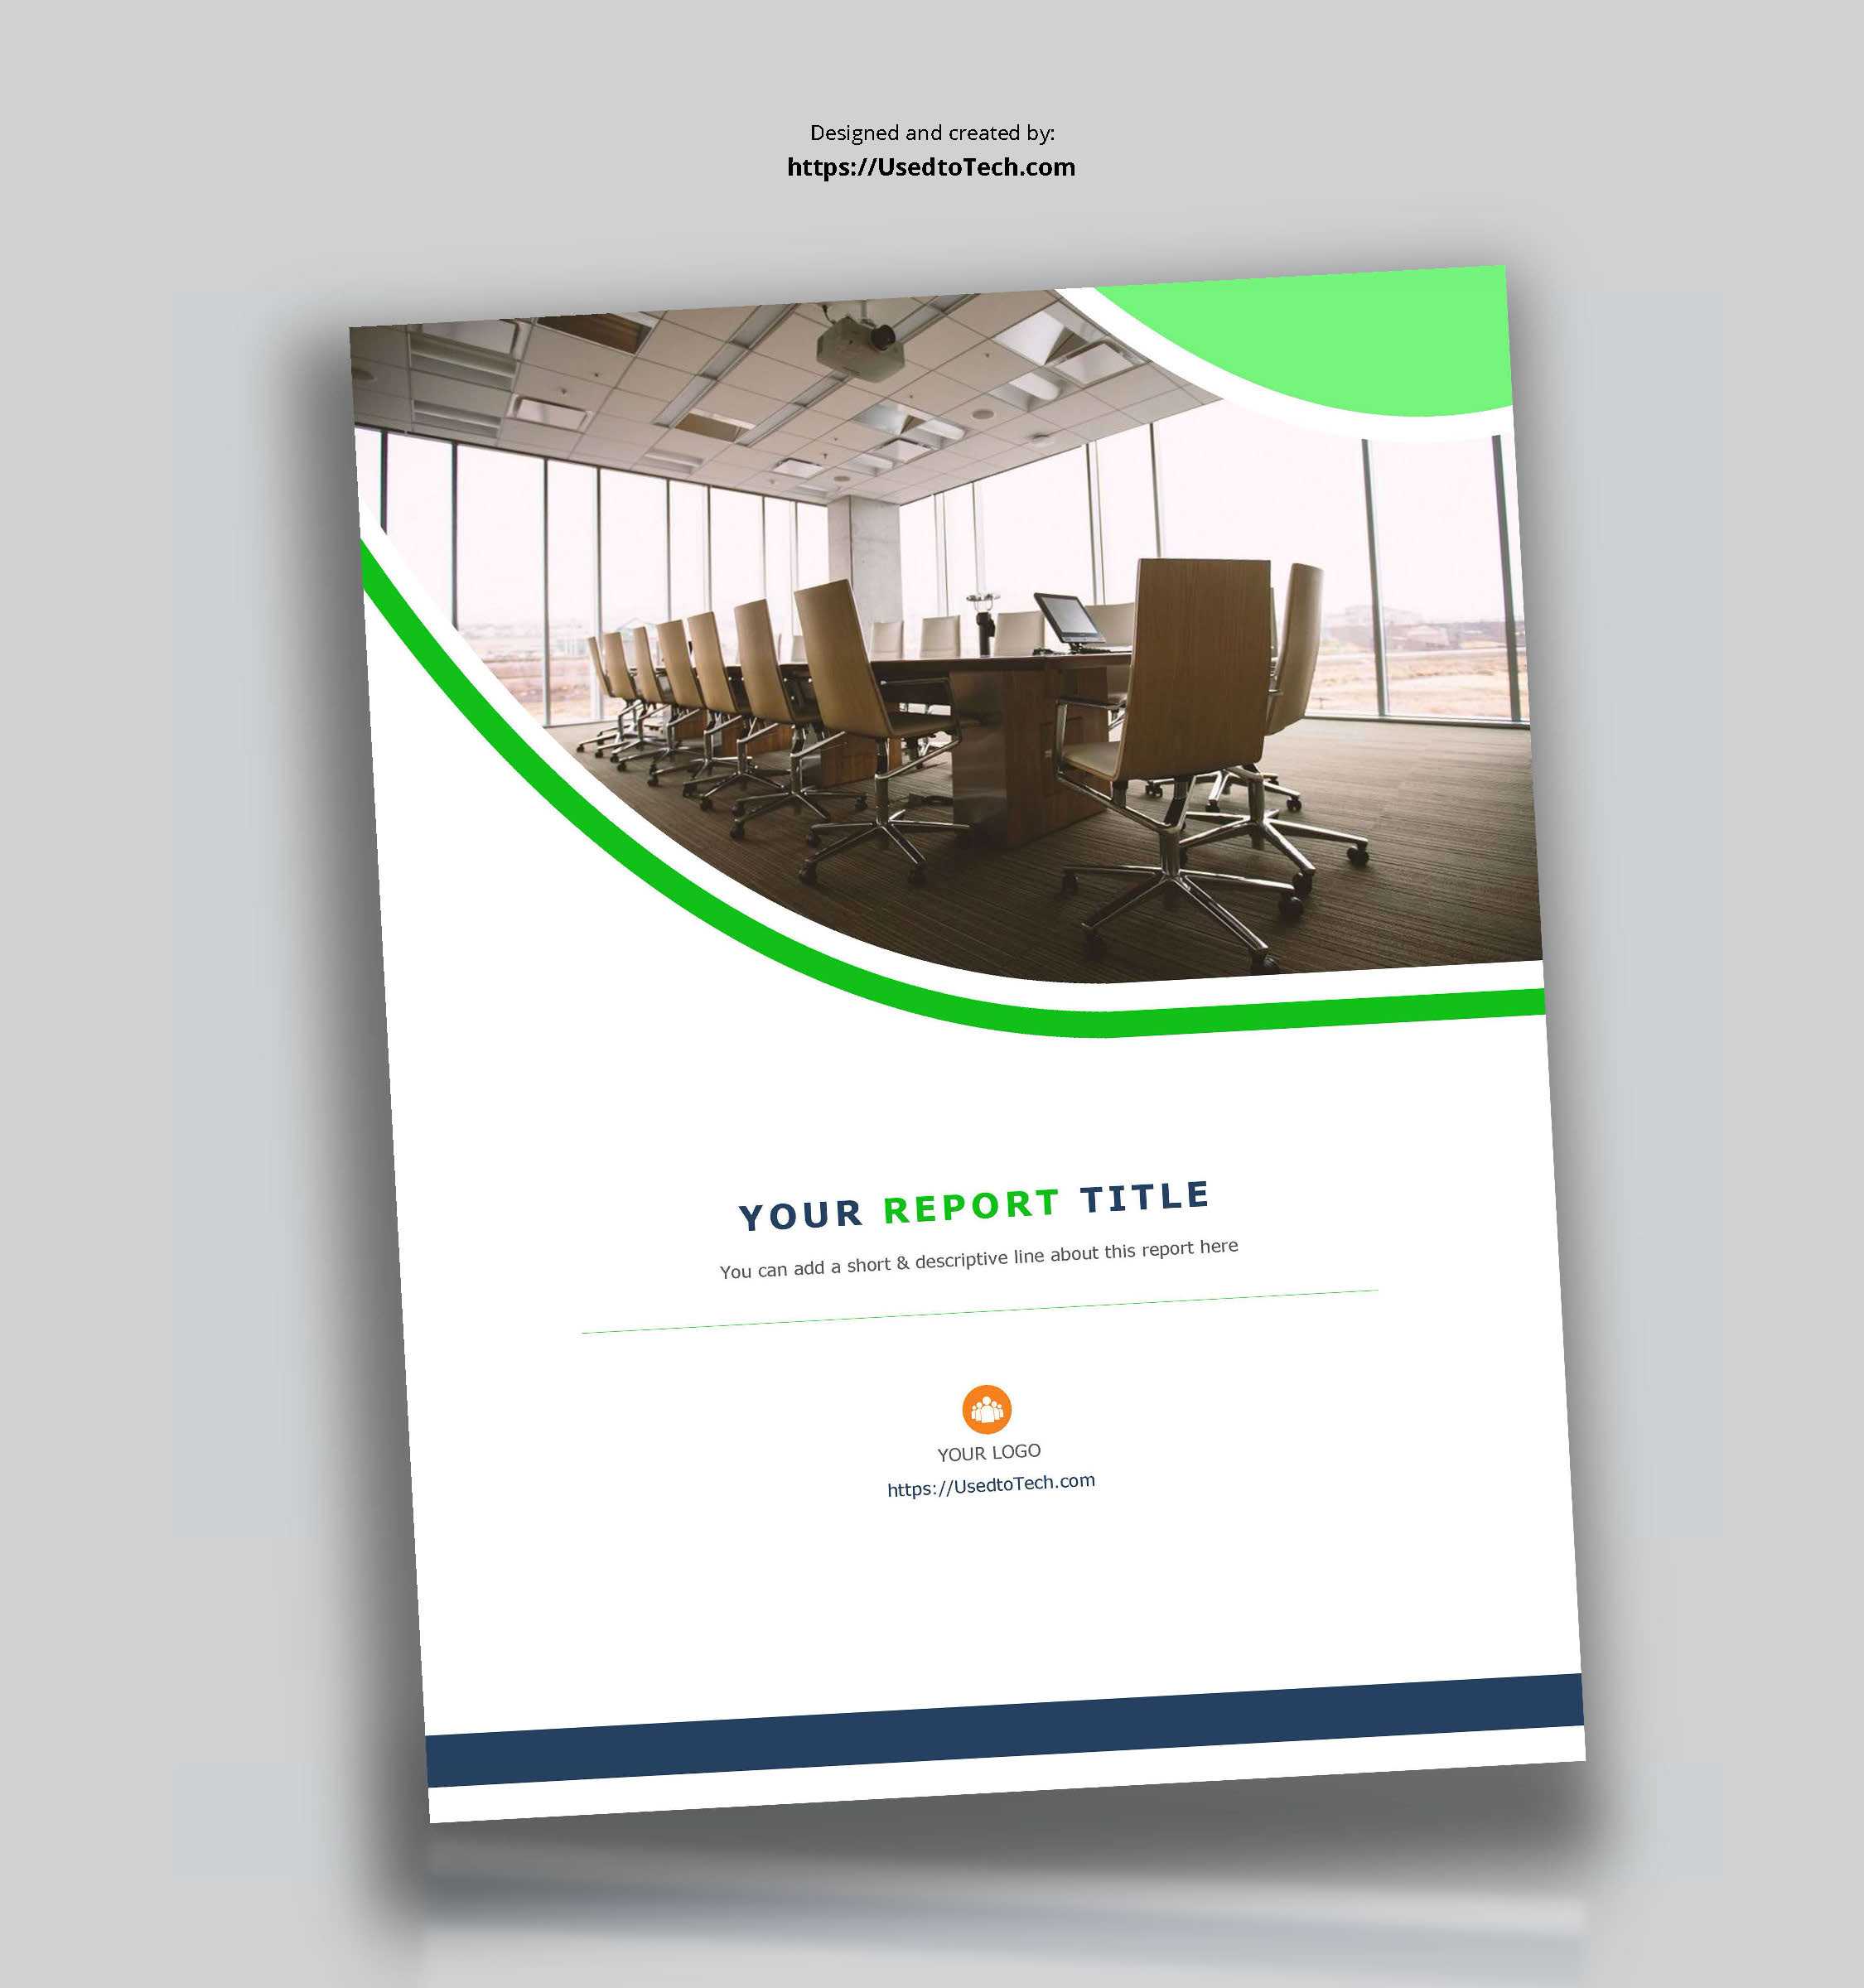 Corporate Report Design Template In Microsoft Word – Used To With Regard To It Report Template For Word